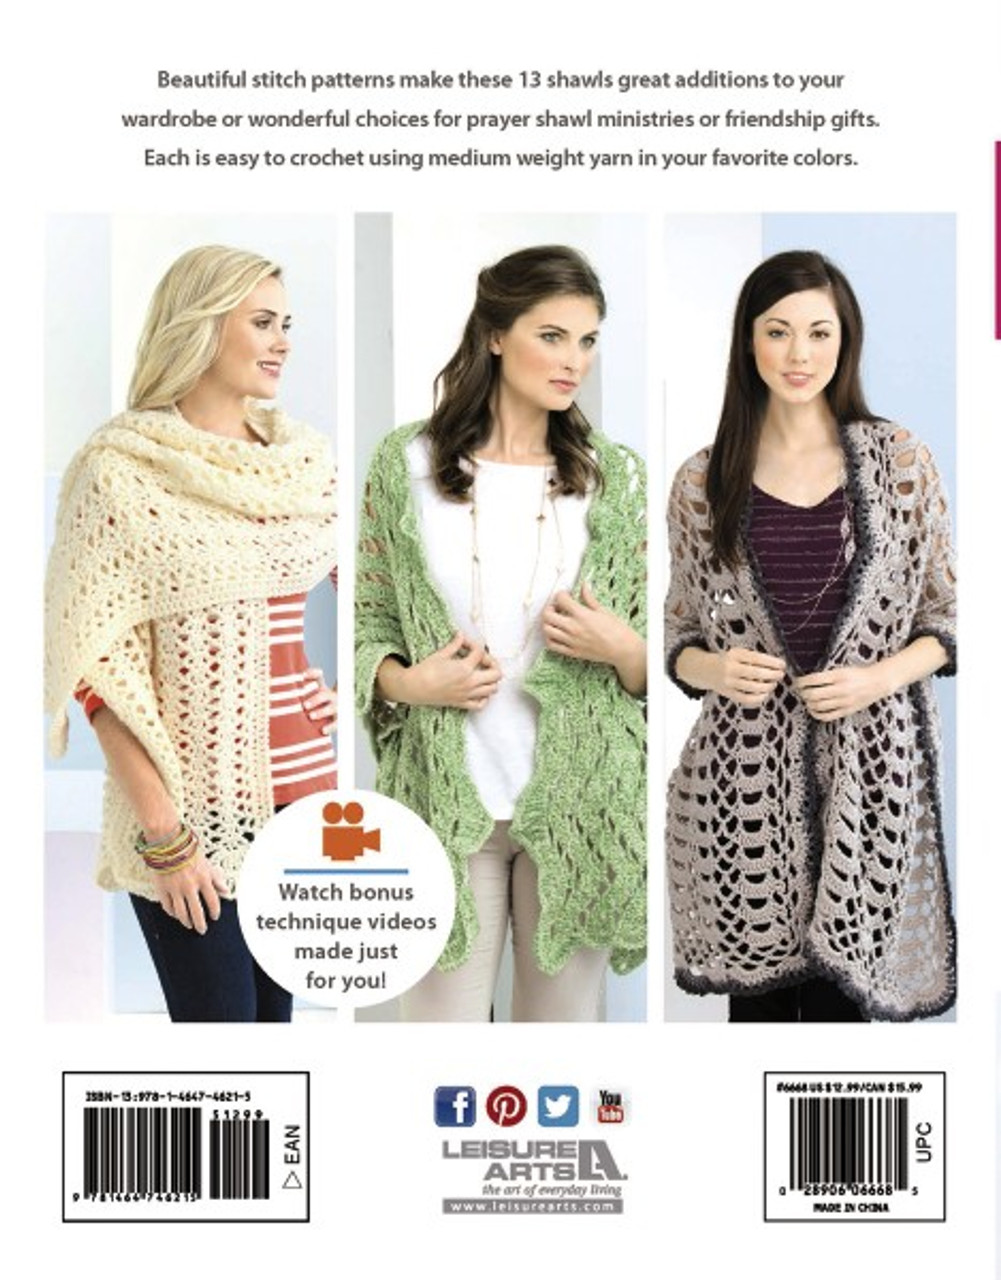 Guide for Giving a Prayer Shawl